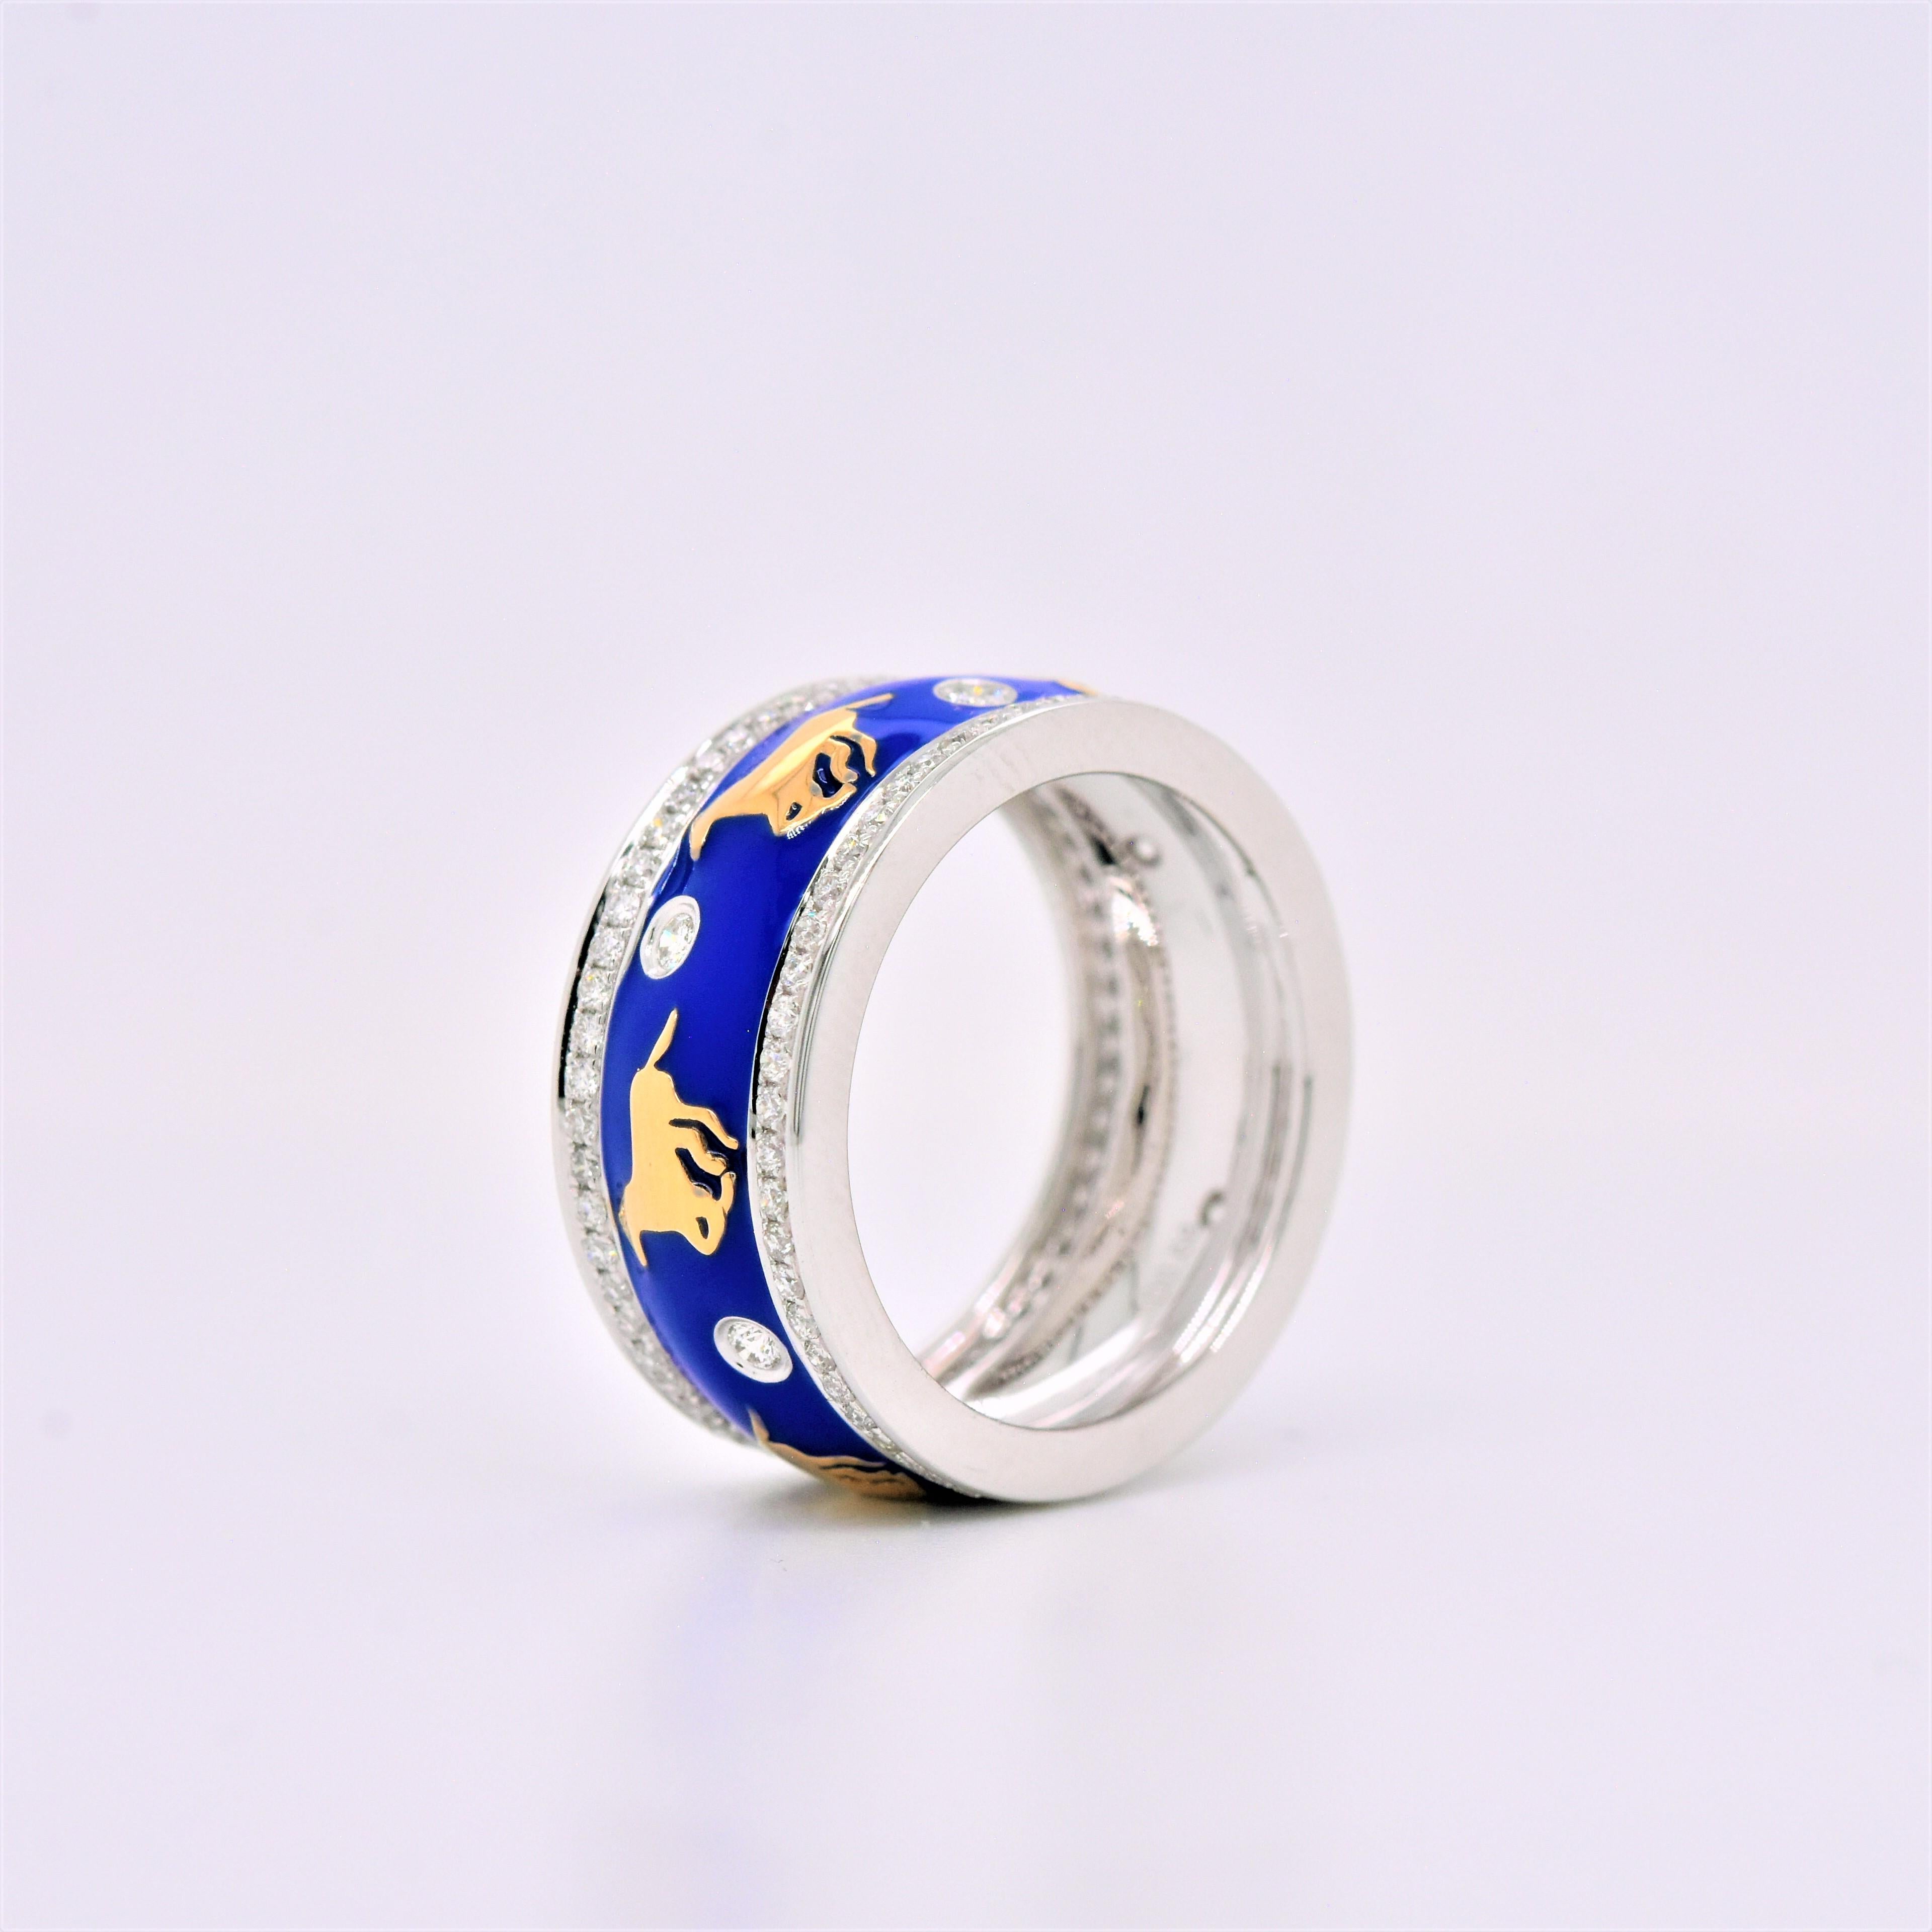 This Enamel ring is in printed enamel with gold plated. This style depicts a horse scene on a blue colored background.
18K White Gold Blue Enamel Horse Ring with Diamonds. 

Diamond And Gold Breakdown:
0.68 Carats Round White Diamonds - Totaling 118